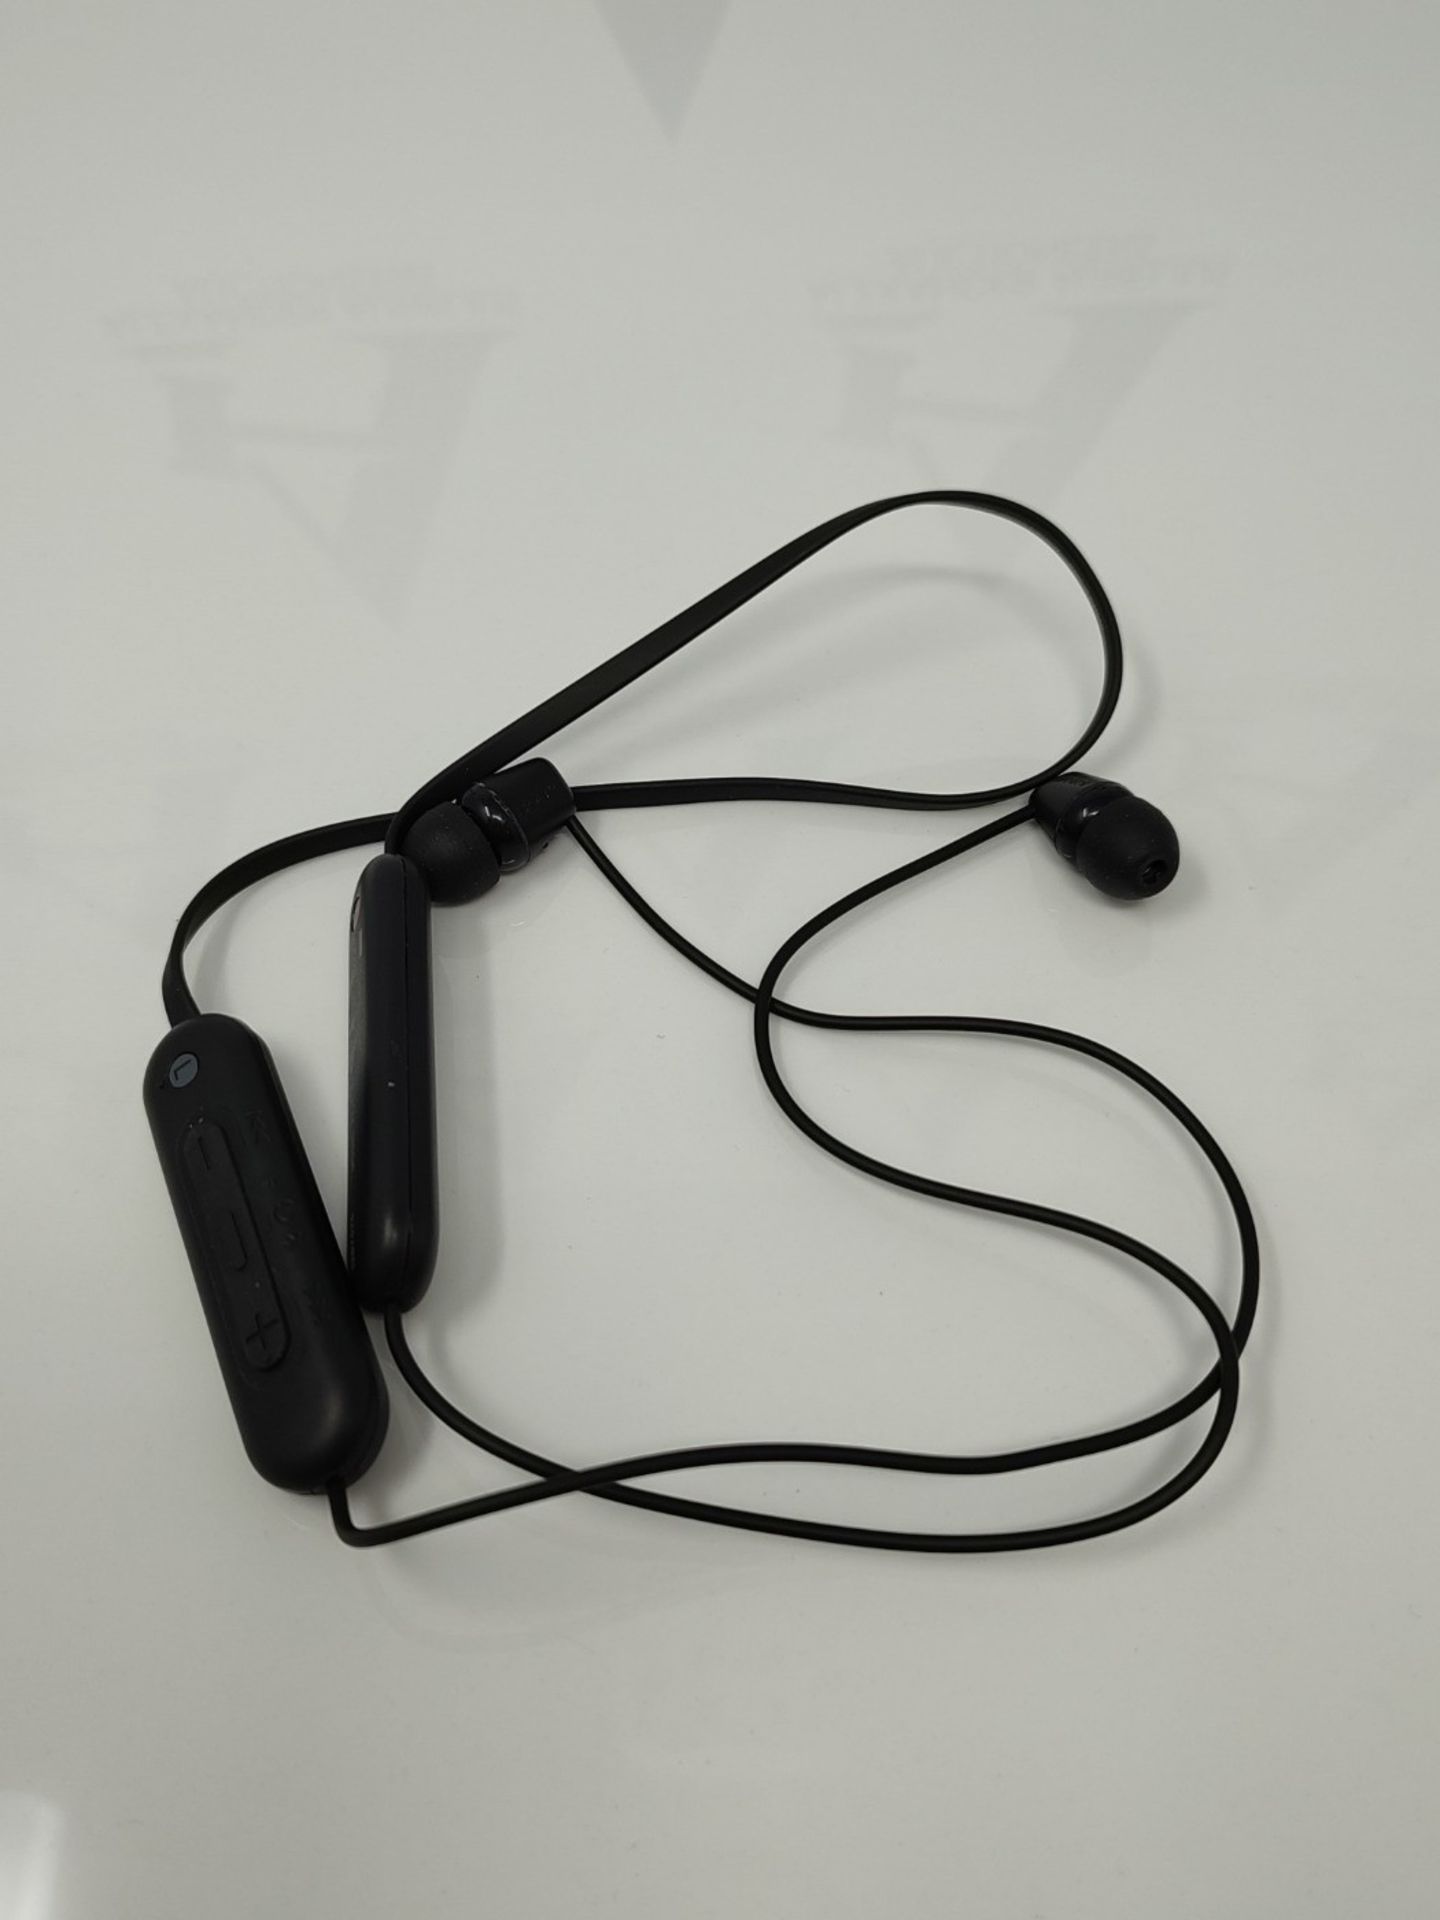 Sony WI-C100 Wireless In-ear Headphones - Up to 25 hours of battery life - Water resis - Image 2 of 2